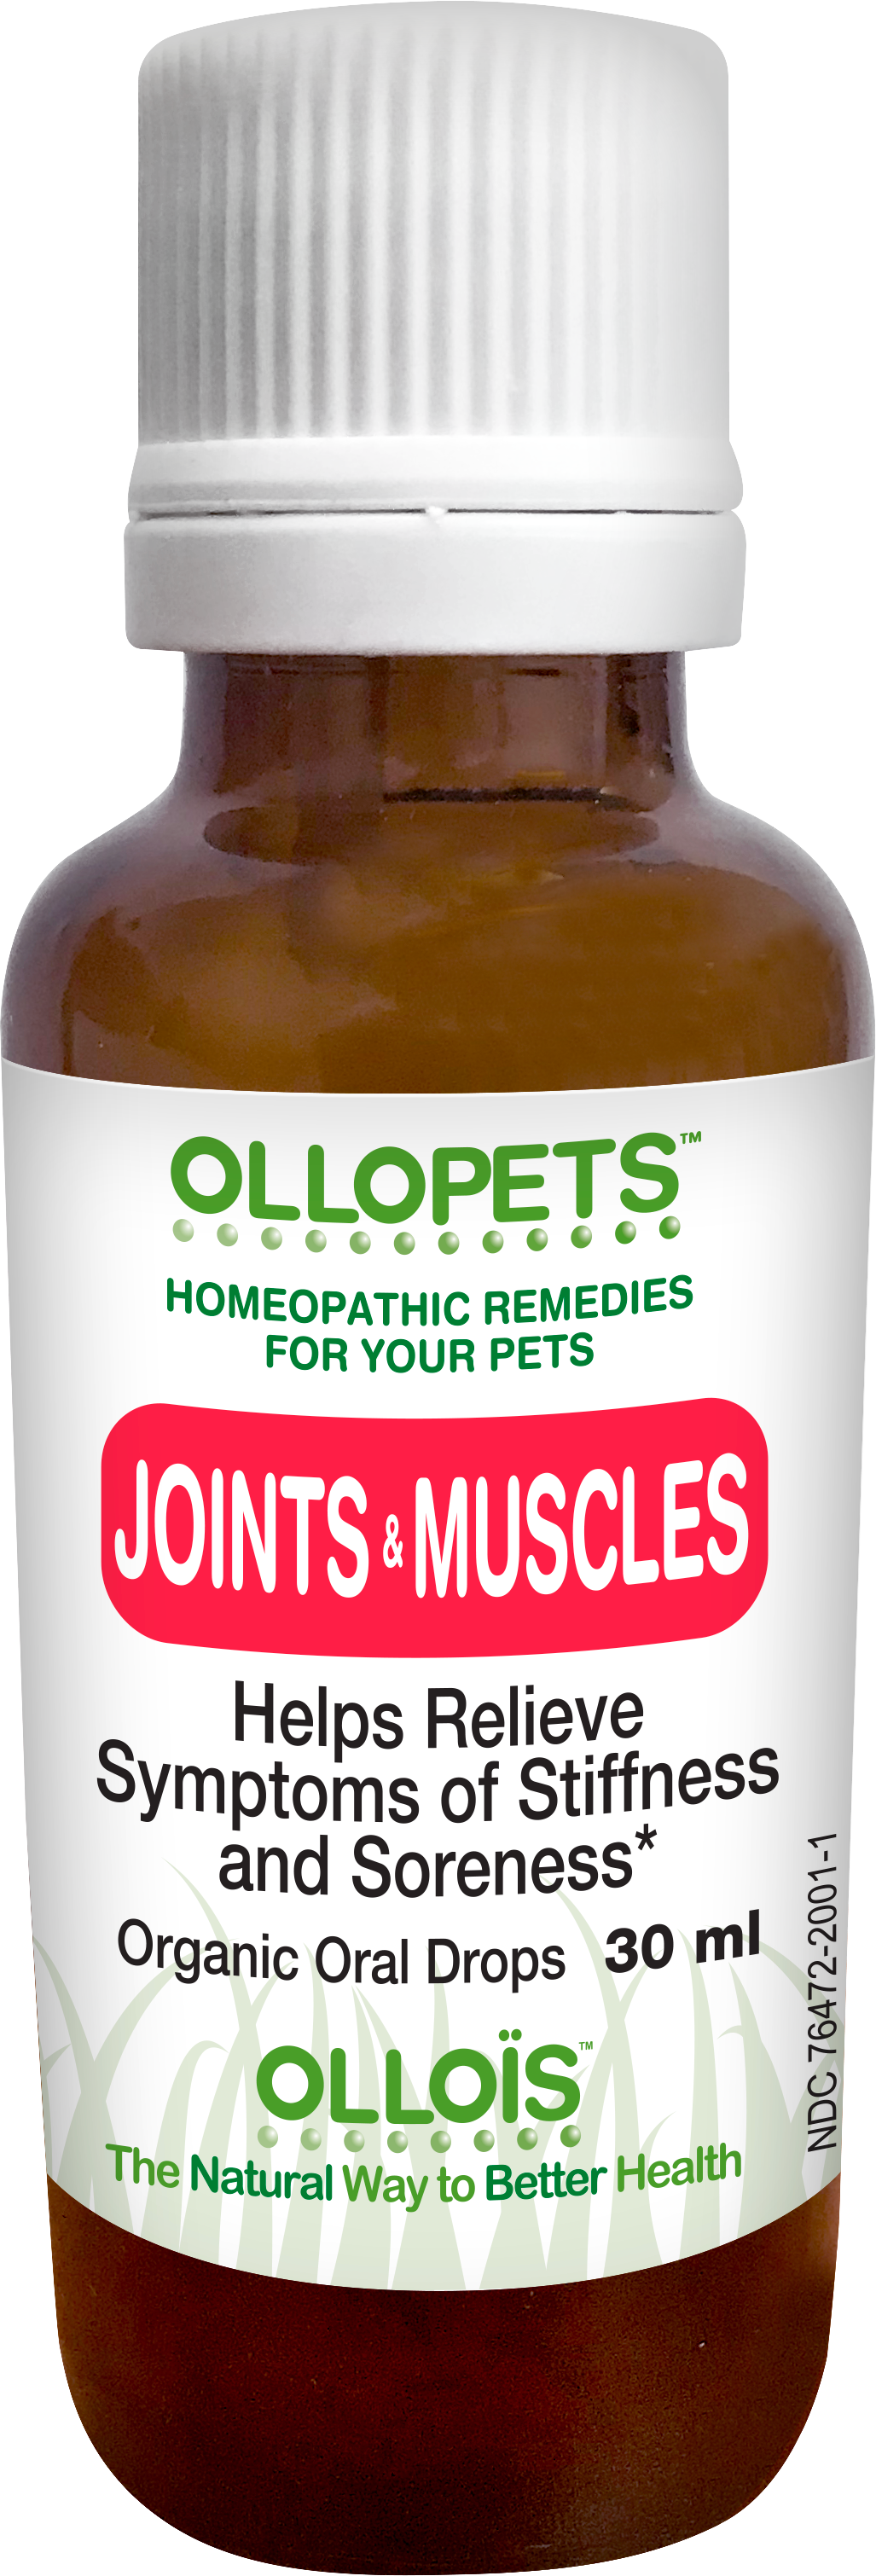 Ollopets Joint & Muscles